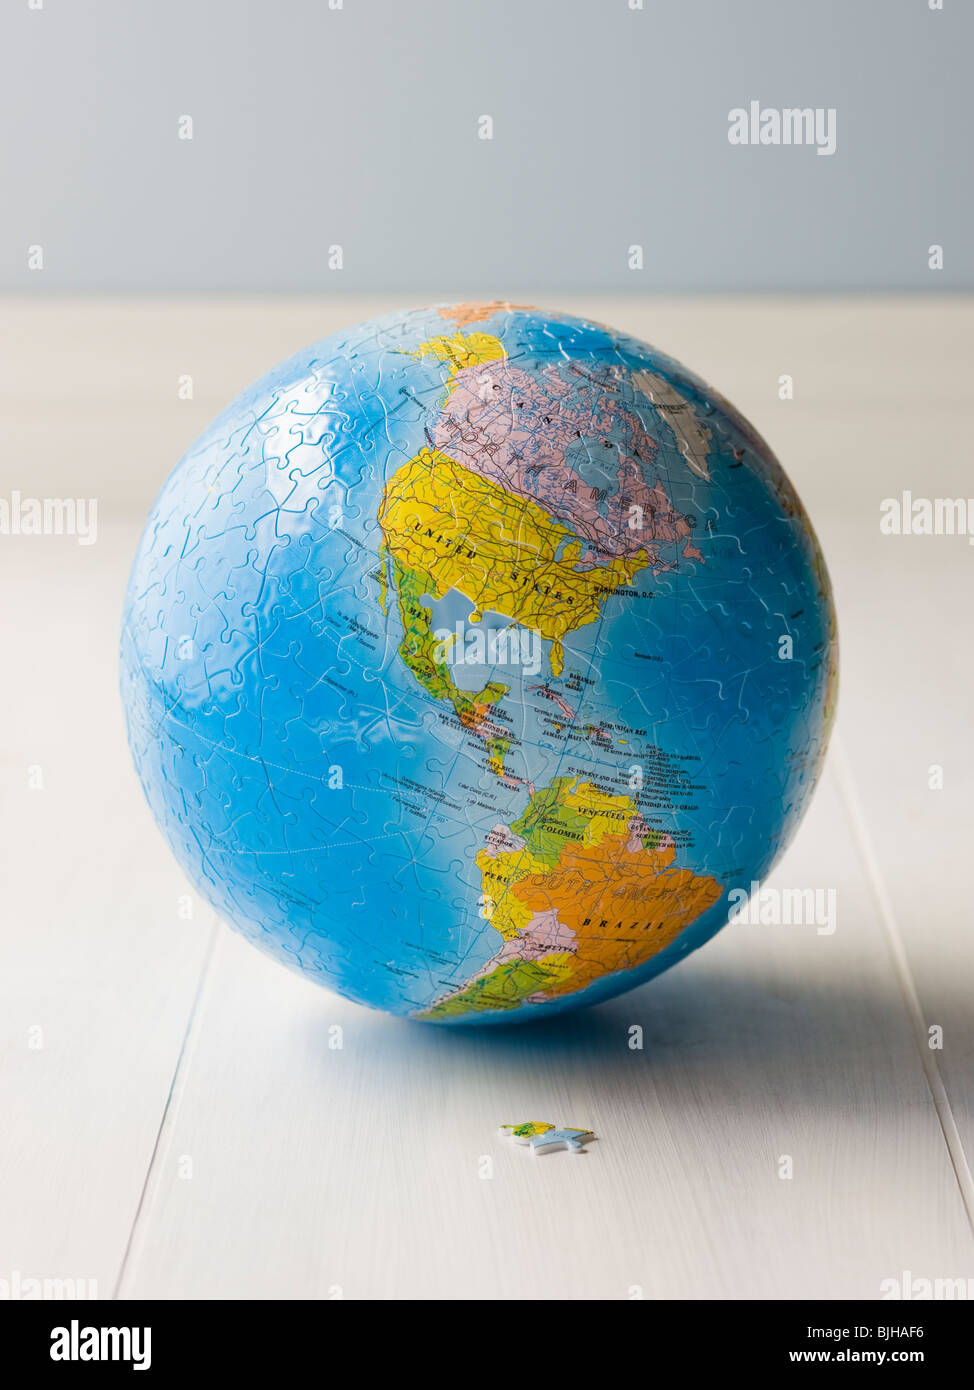 planet earth puzzle Stock Photo